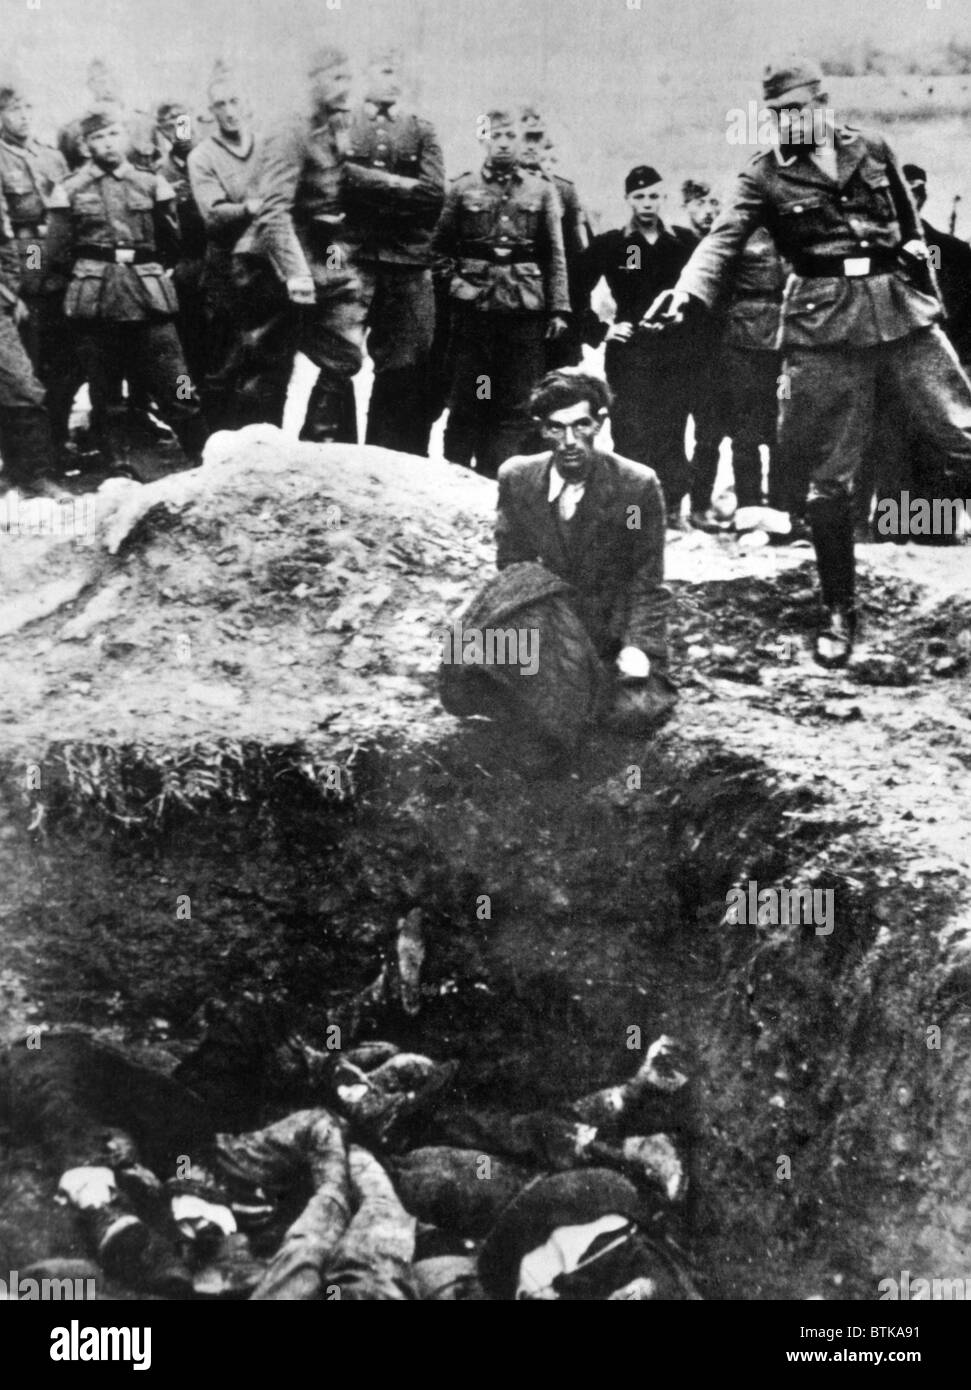 Polish civilians being executed by German soldiers, 1939 Stock Photo